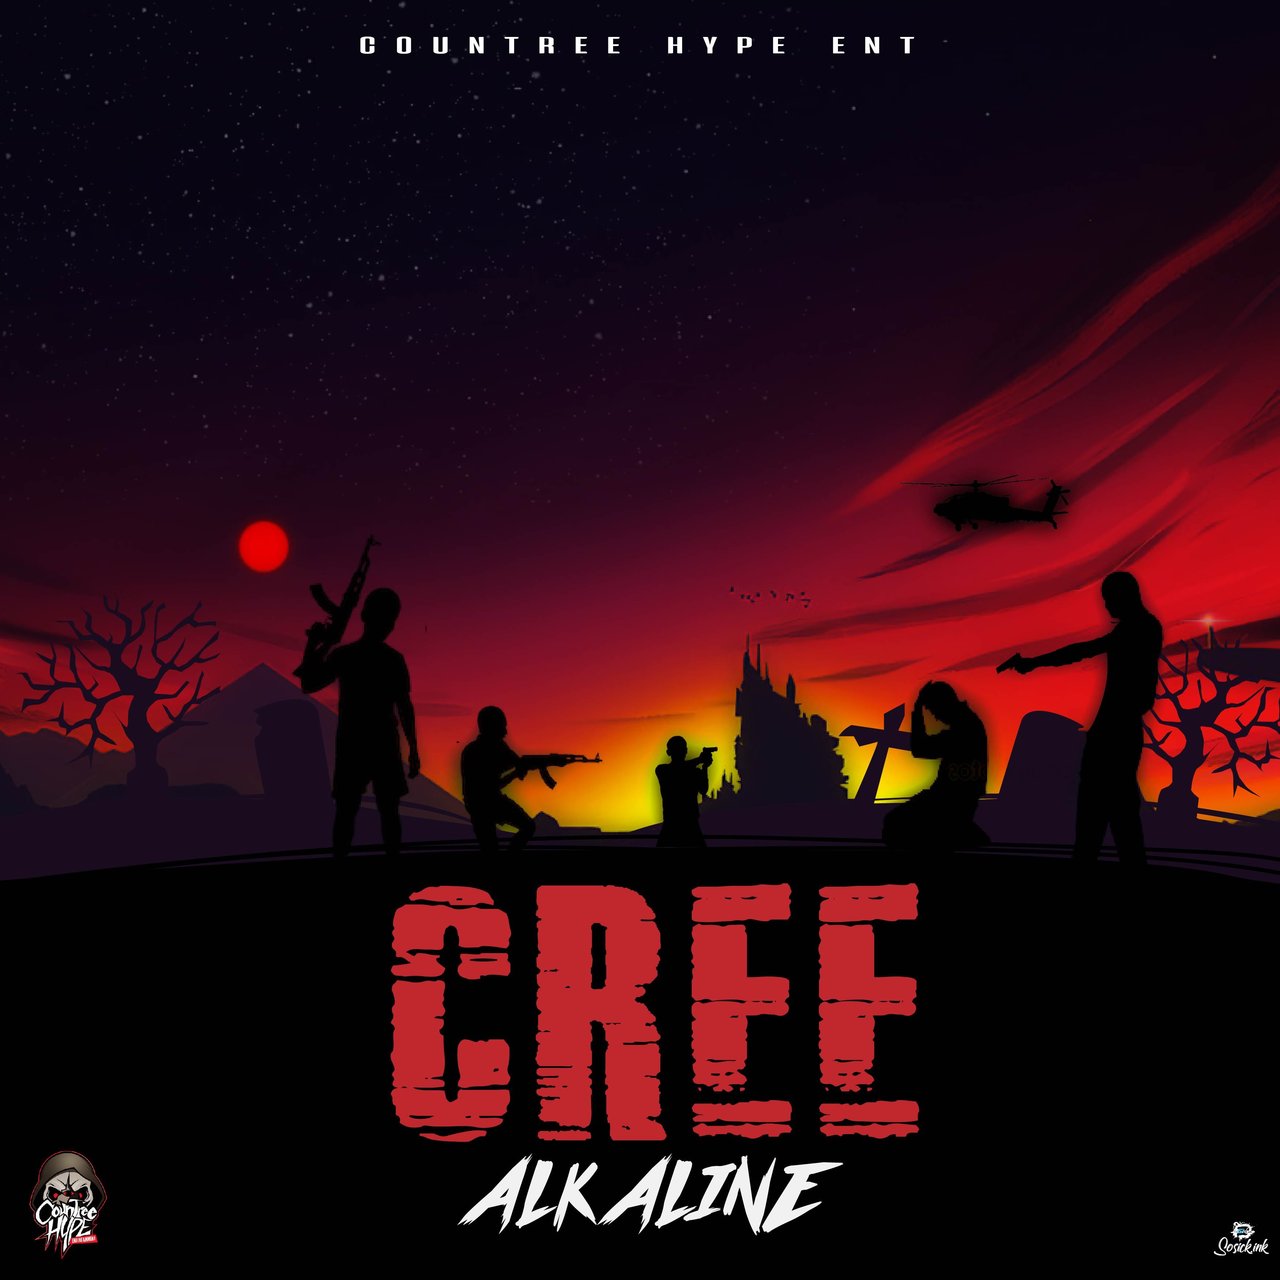 Alkaline - Cree (Cover)